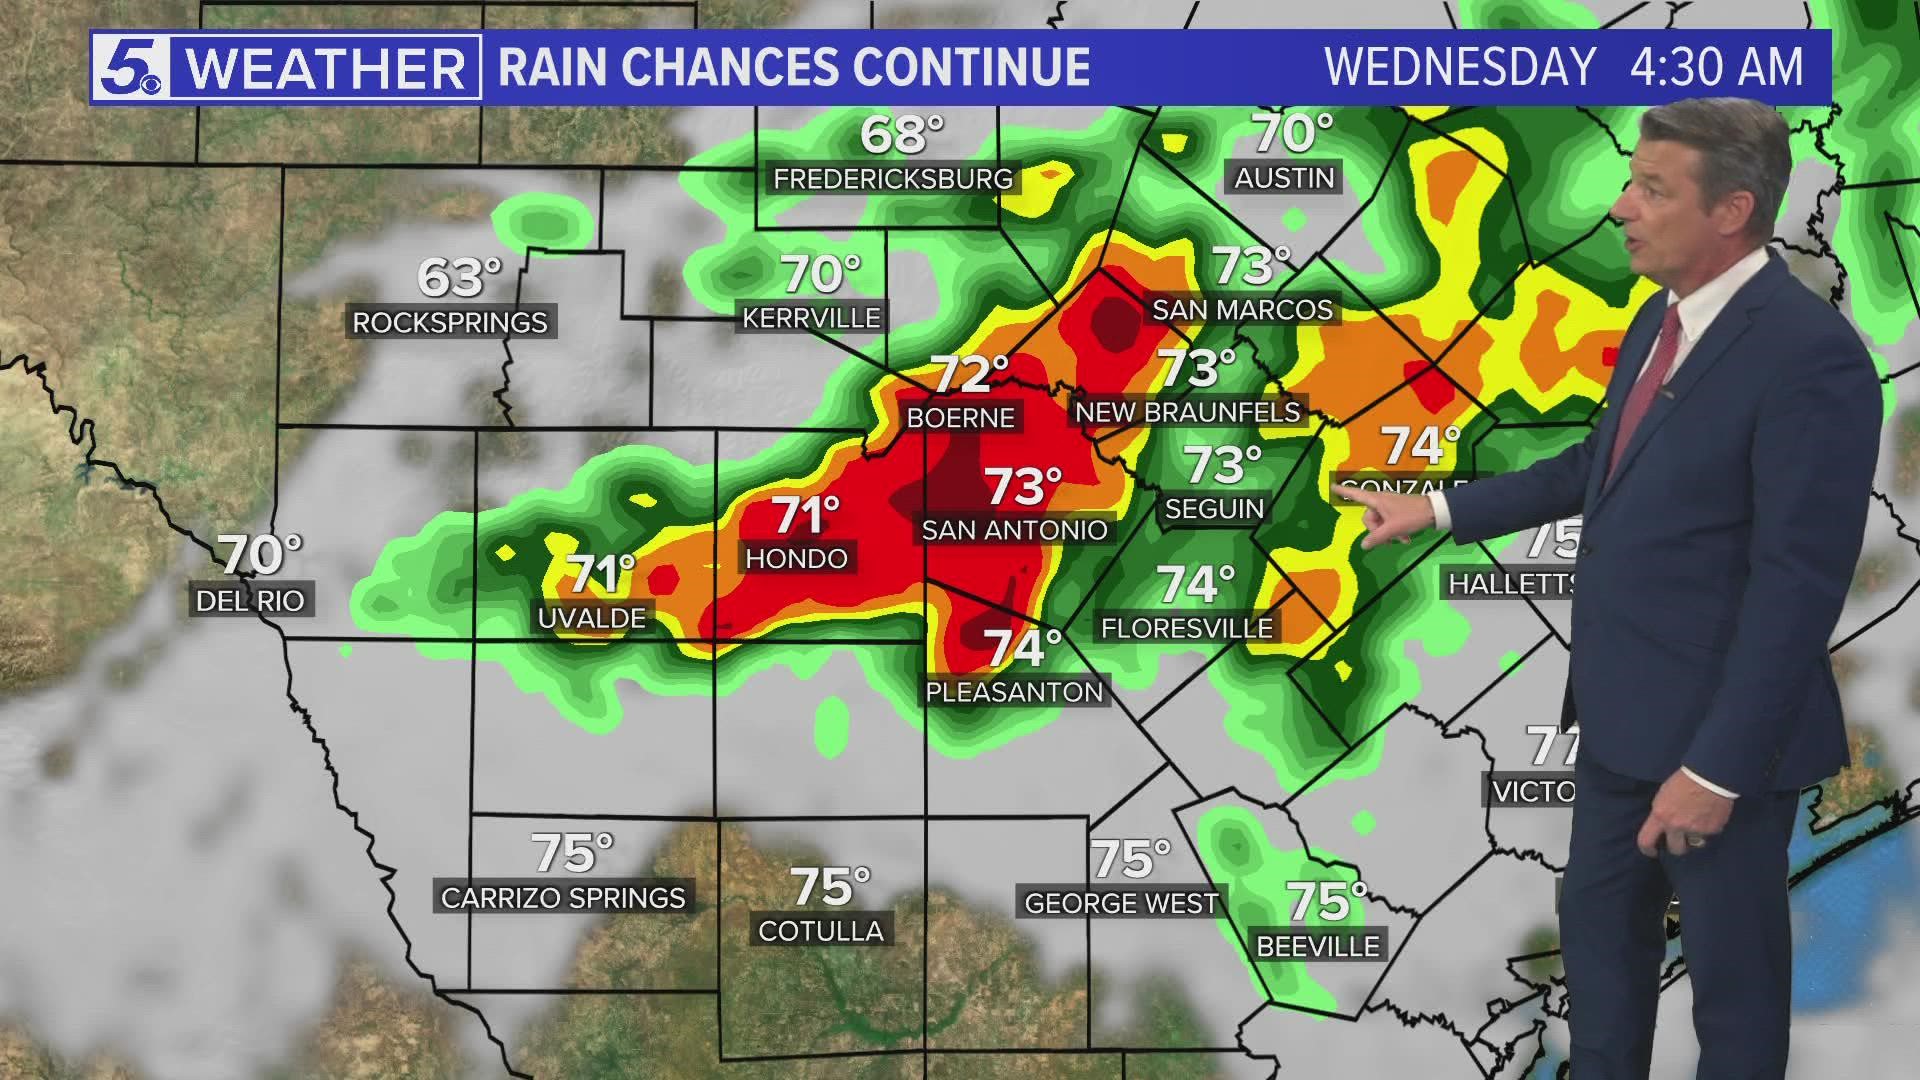 San Antonians will have another good chance at rain early Wednesday morning.